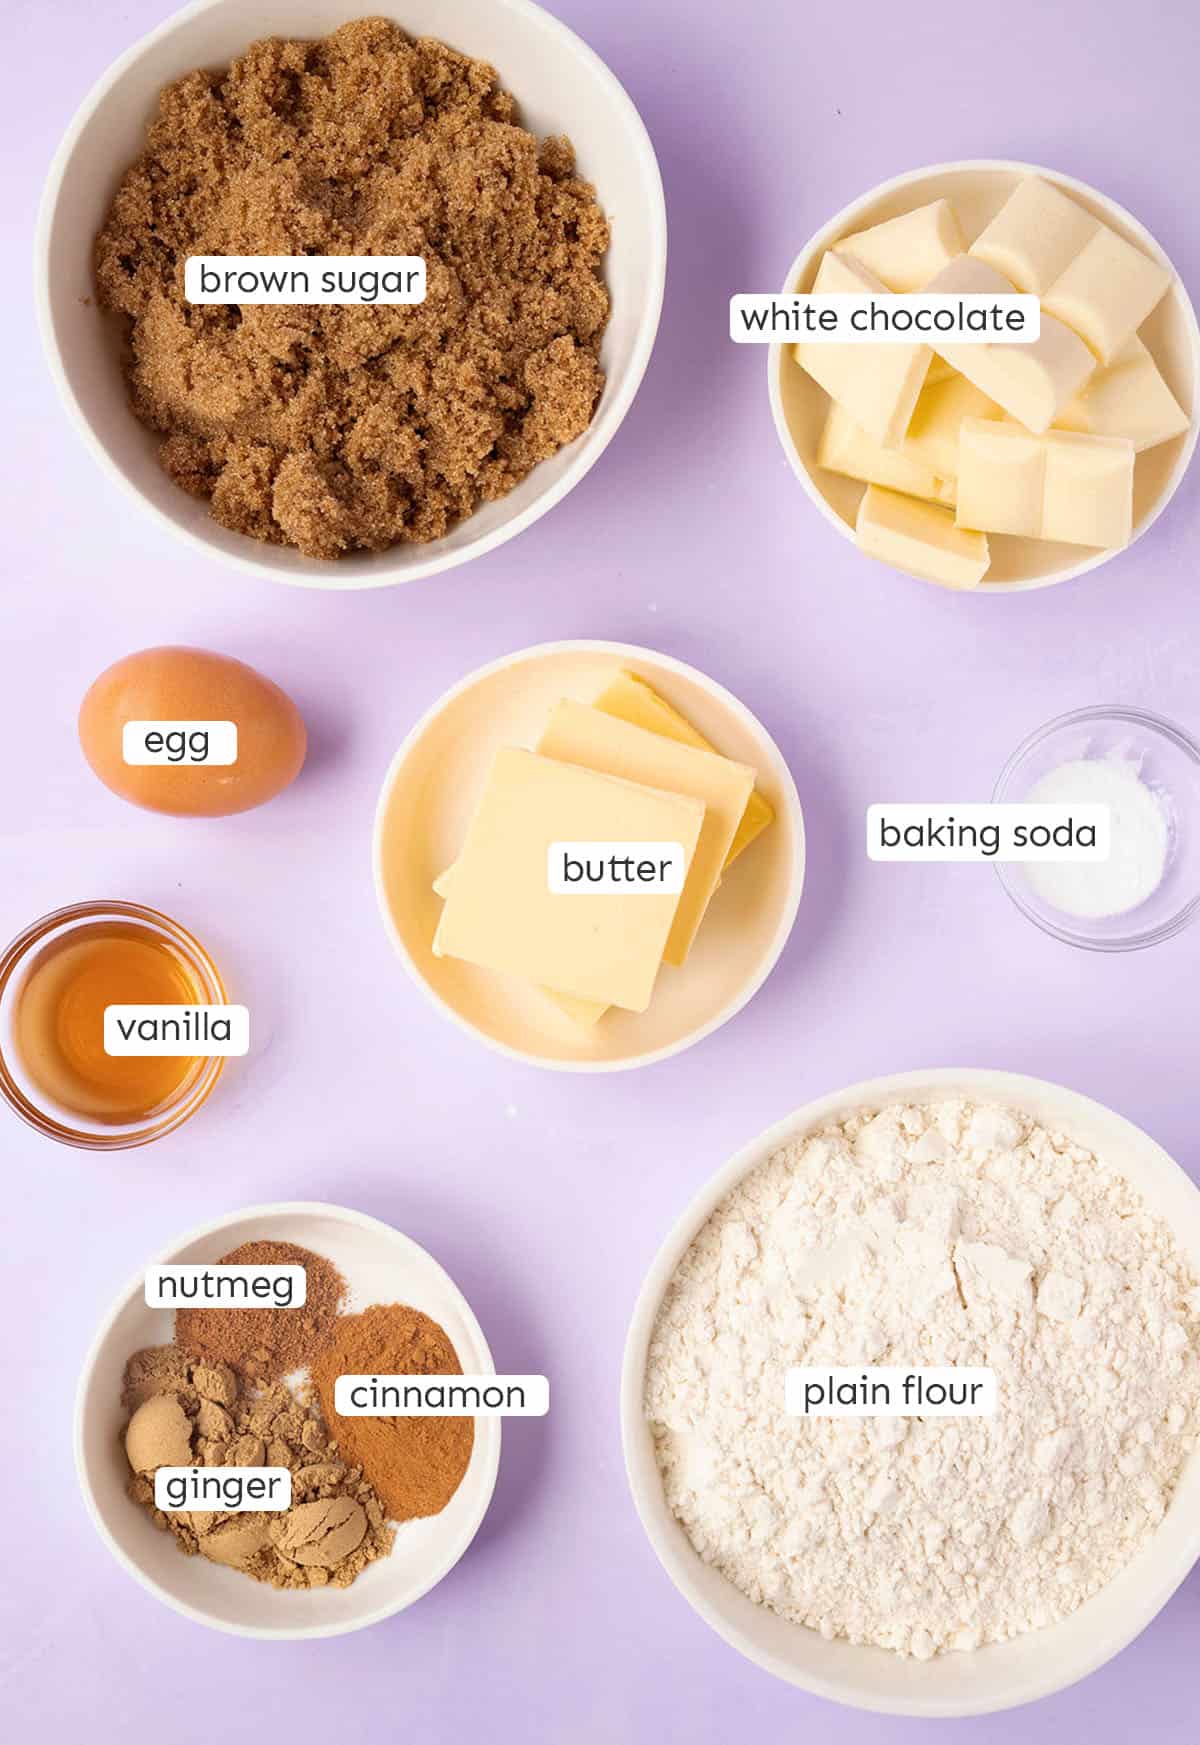 All the ingredients needed to make Gingerbread NYC Cookies from scratch on a purple background. 